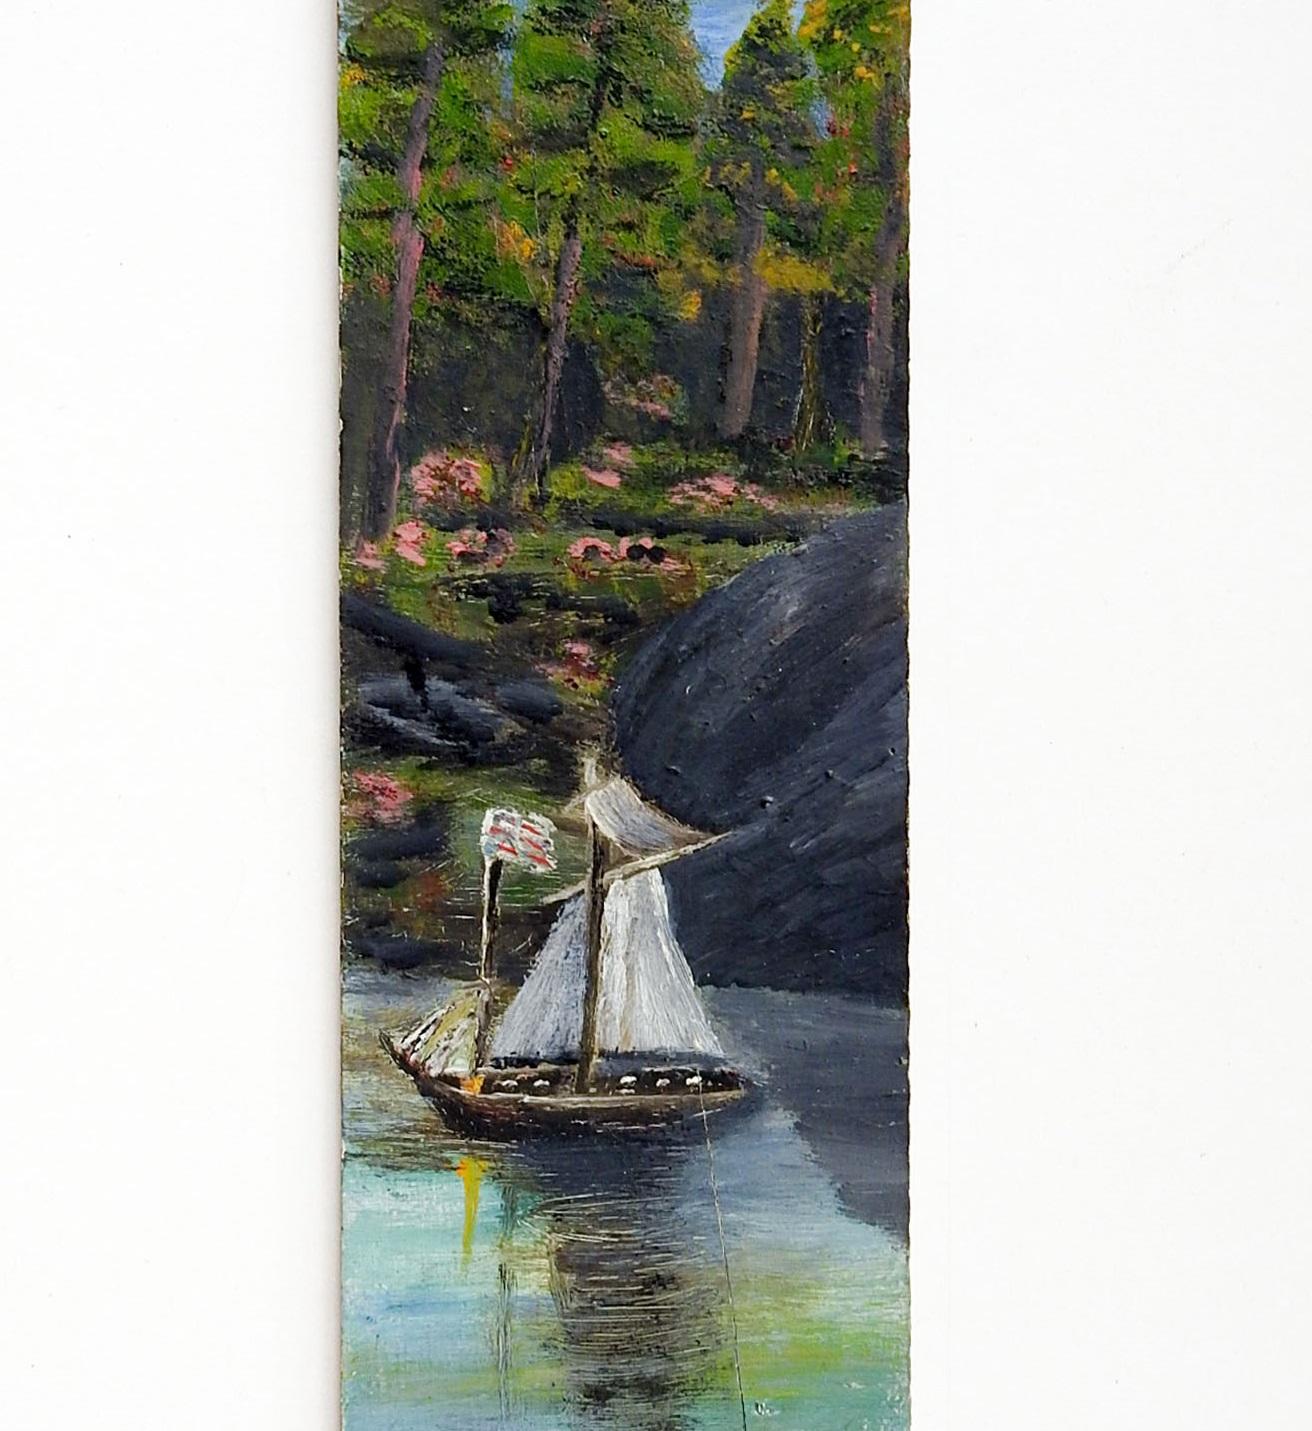 Antique circa 1915 oil on wood board folk art river scene with ship flying American flag painting, wood is from an old tobacco crate. Unsigned. Unframed, edge wear.